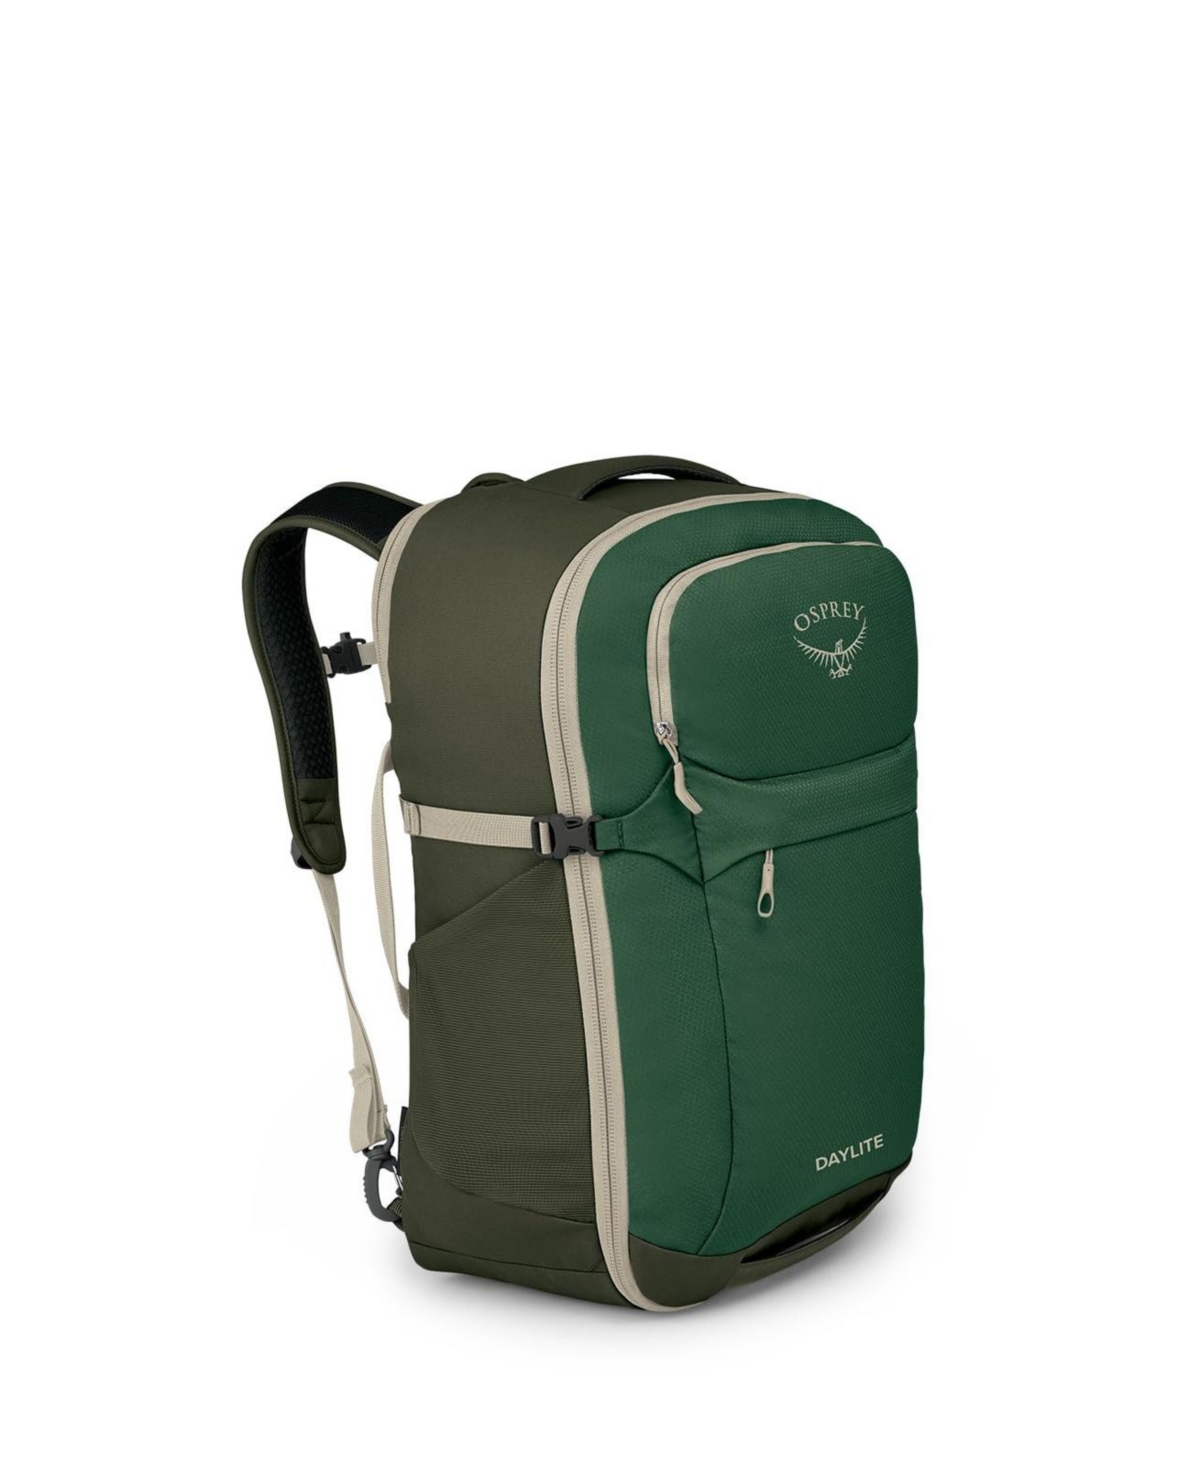 Daylite Carry-On 44L Travel Backpack - Green canopy/green creek